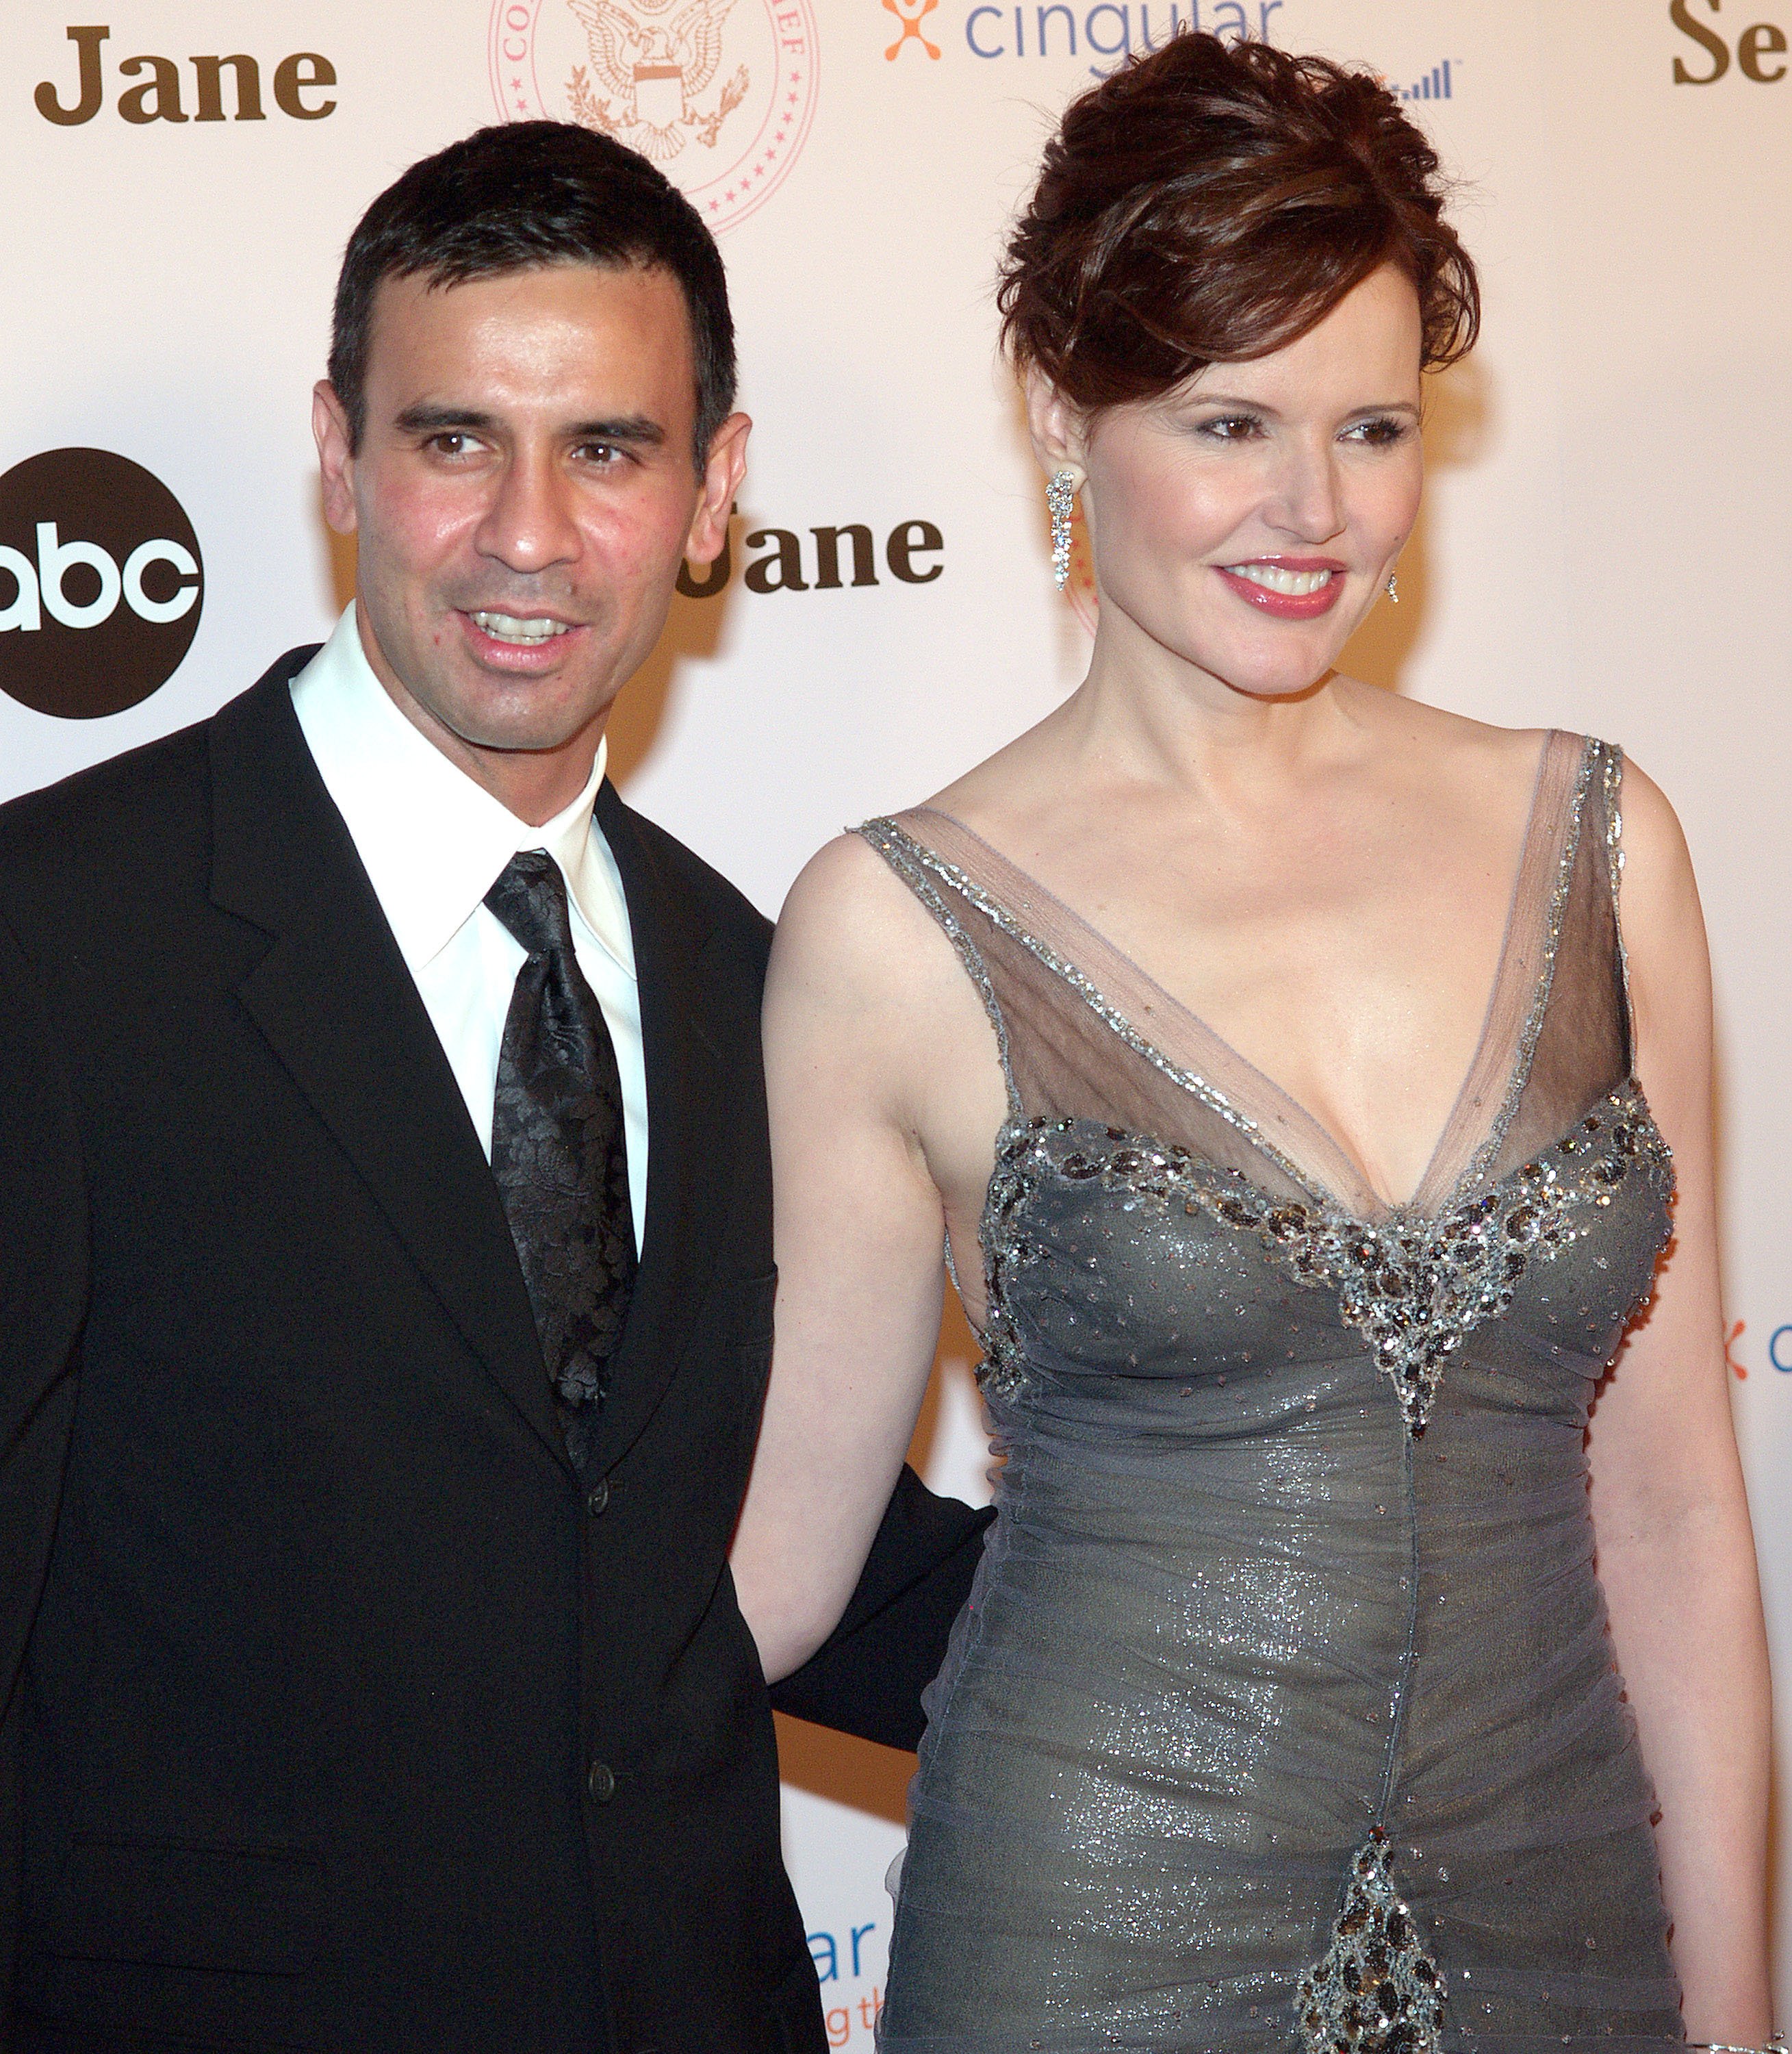 Reza Jarrahy and Geena Davis during "Commander in chief" Inaugural Ball and Premiere Screening at The Regent Beverly Wilshire in Beverly Hills, CA.  / Source: Getty Images